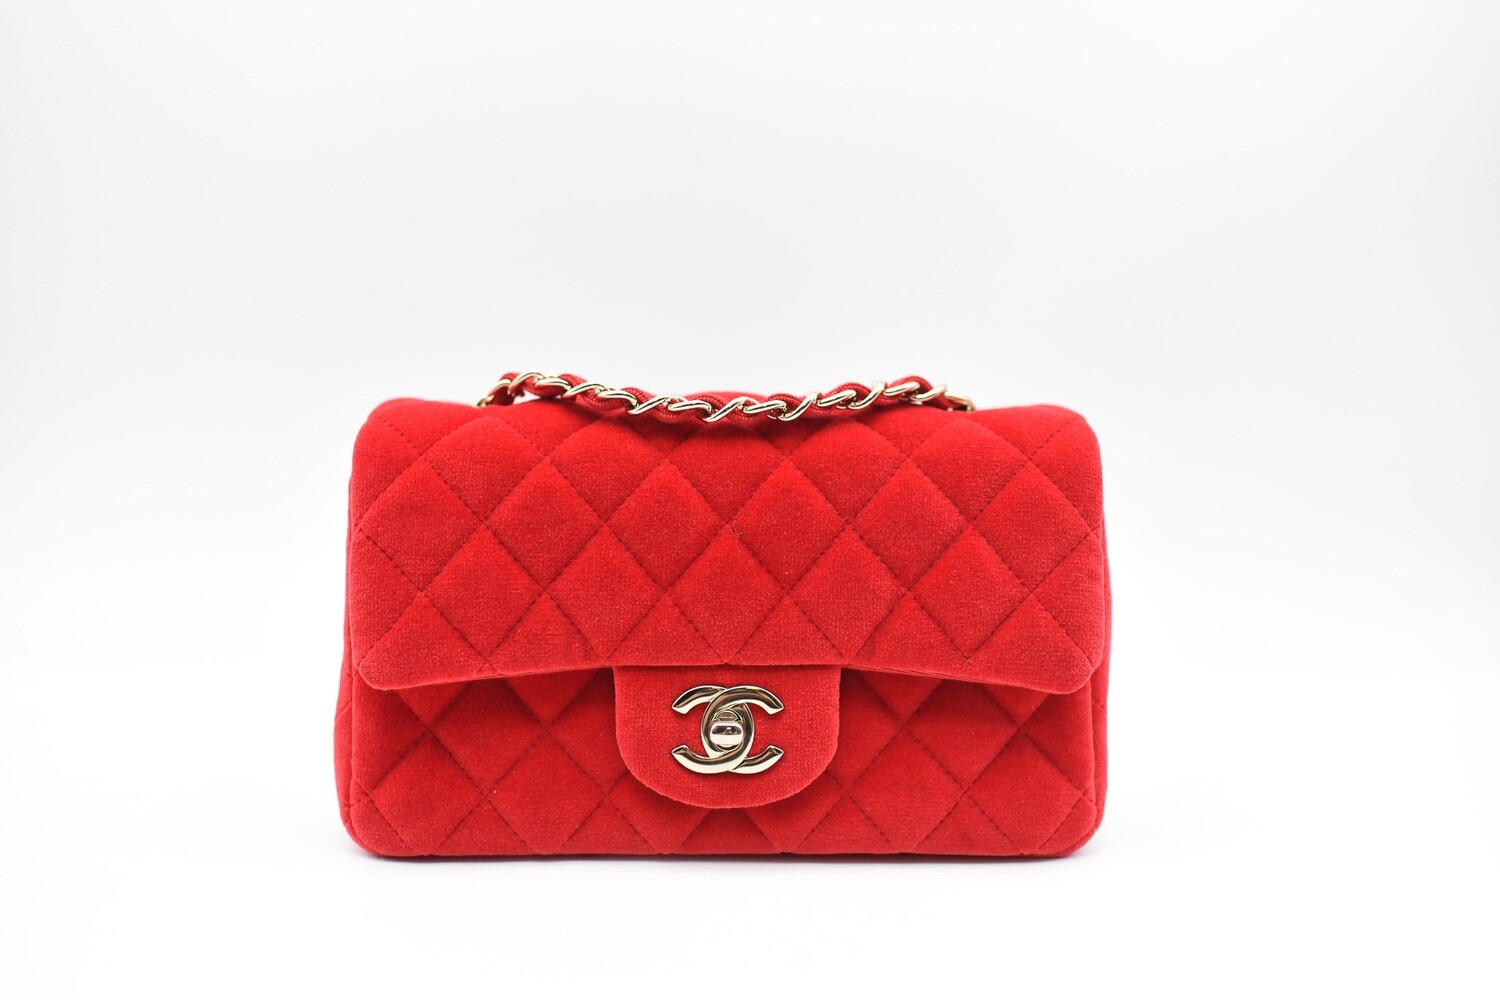 Chanel Classic Mini Rectangular, Red Velvet with Gold Hardware, Preowned in  Dustbag MA001 - Julia Rose Boston